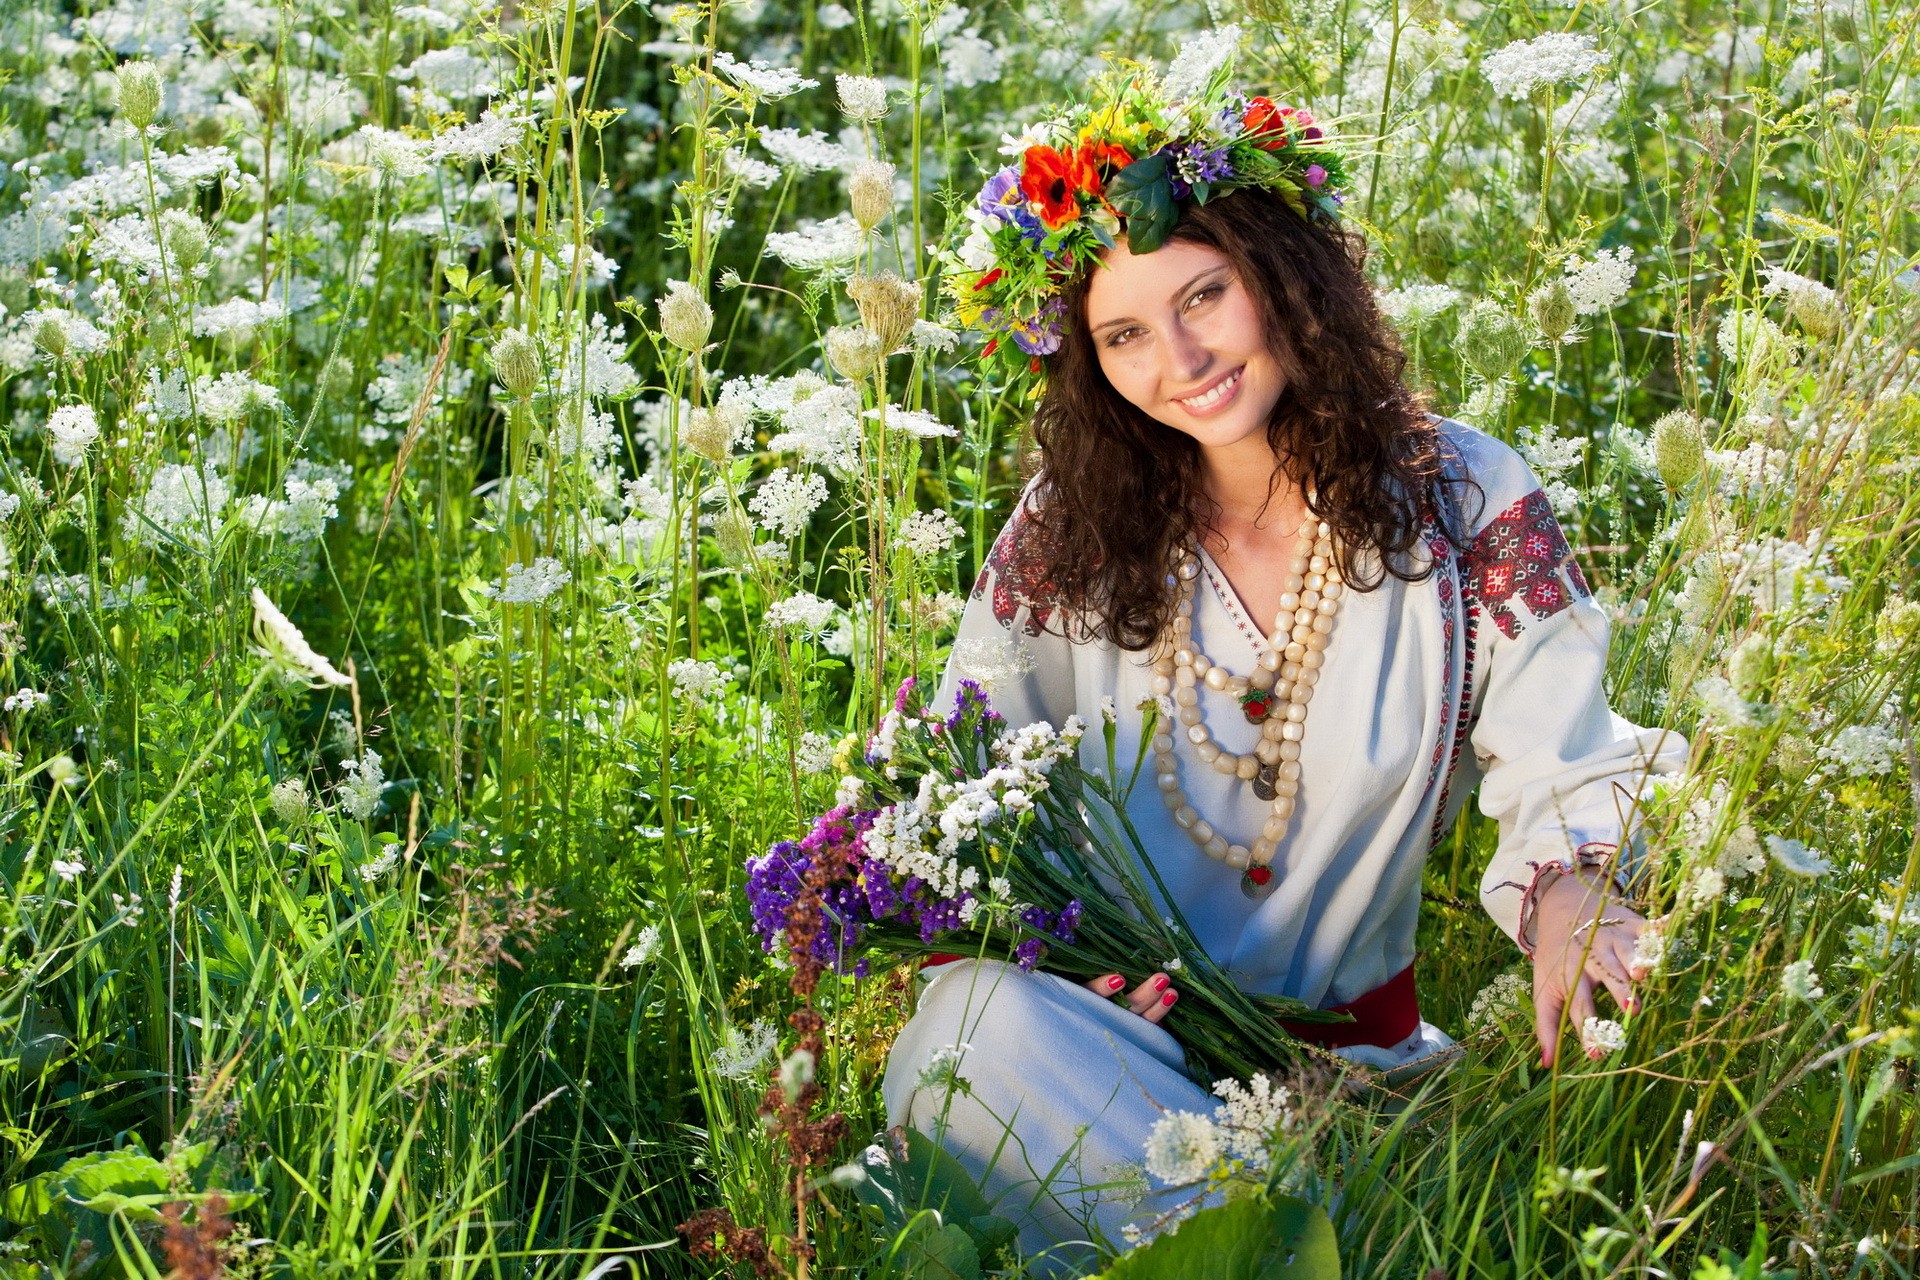 People 1920x1280 women model brunette women outdoors flowers nature field flower in hair curly hair wreaths plants looking at viewer smiling flower crown traditional clothing Russian